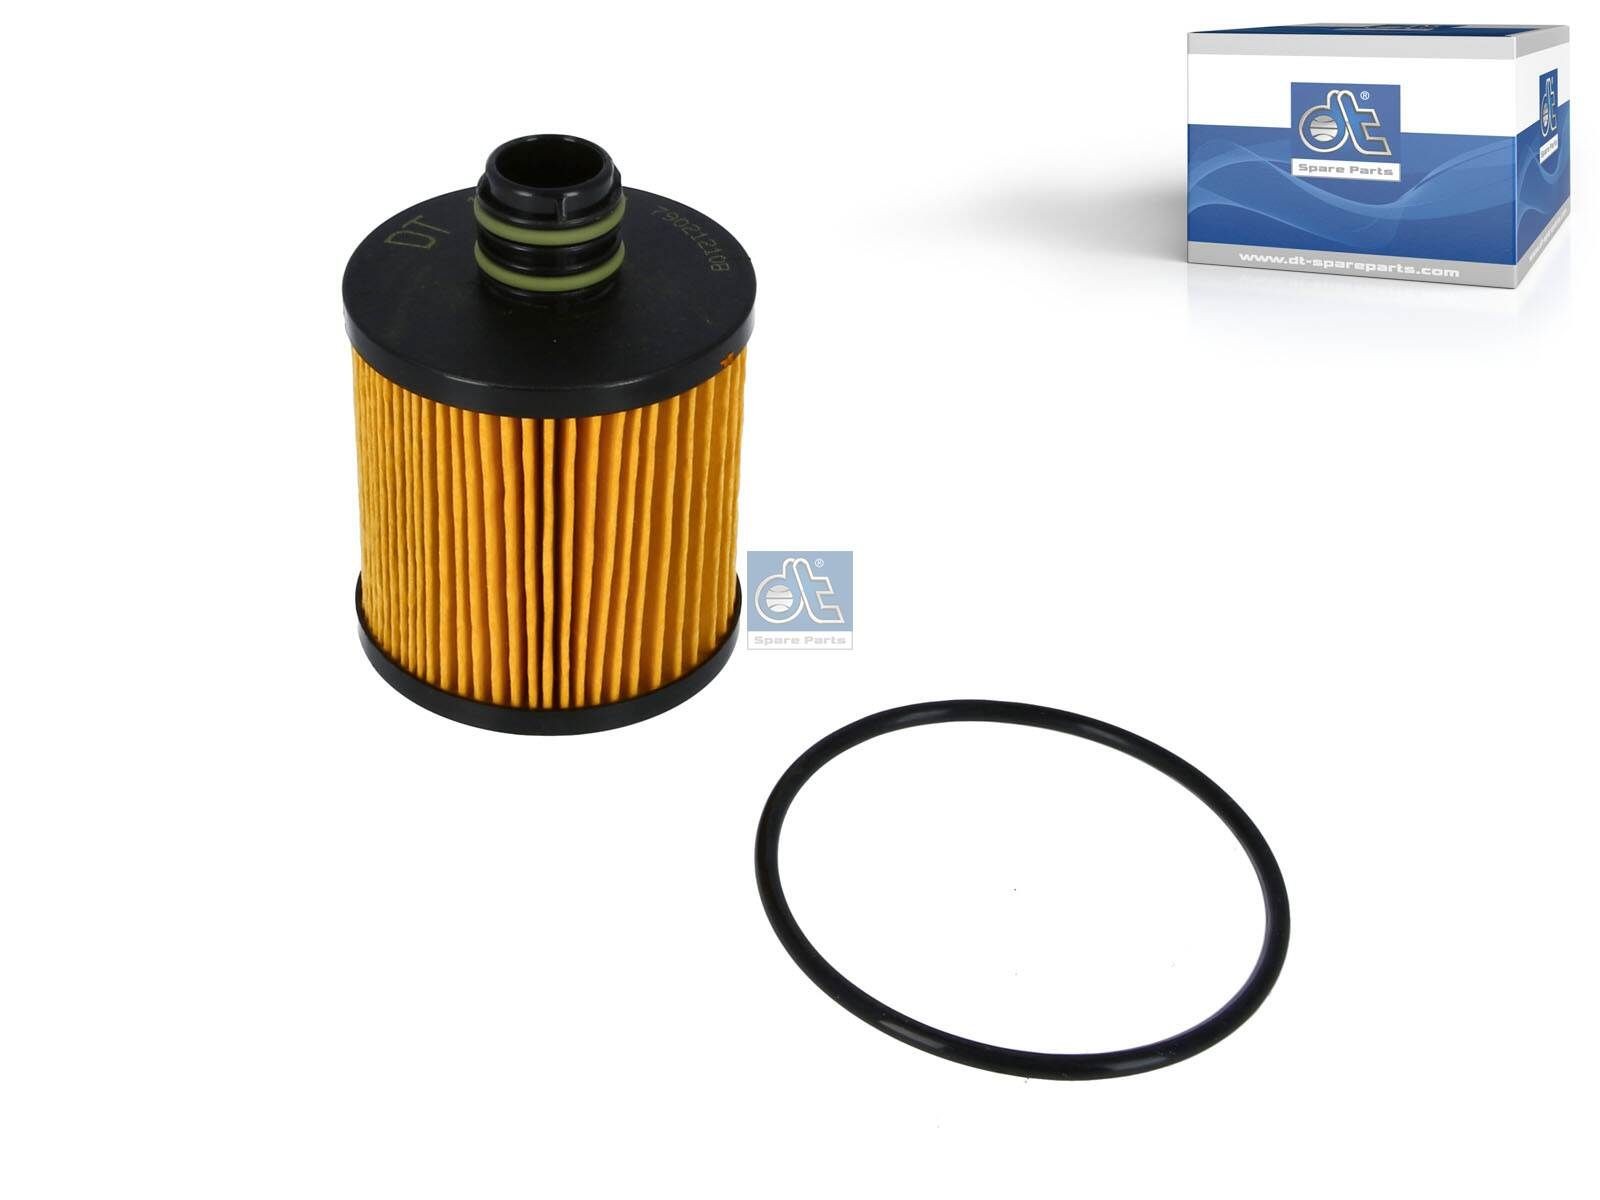 DT Spare Parts 12.16000 Oil filter SUZUKI experience and price